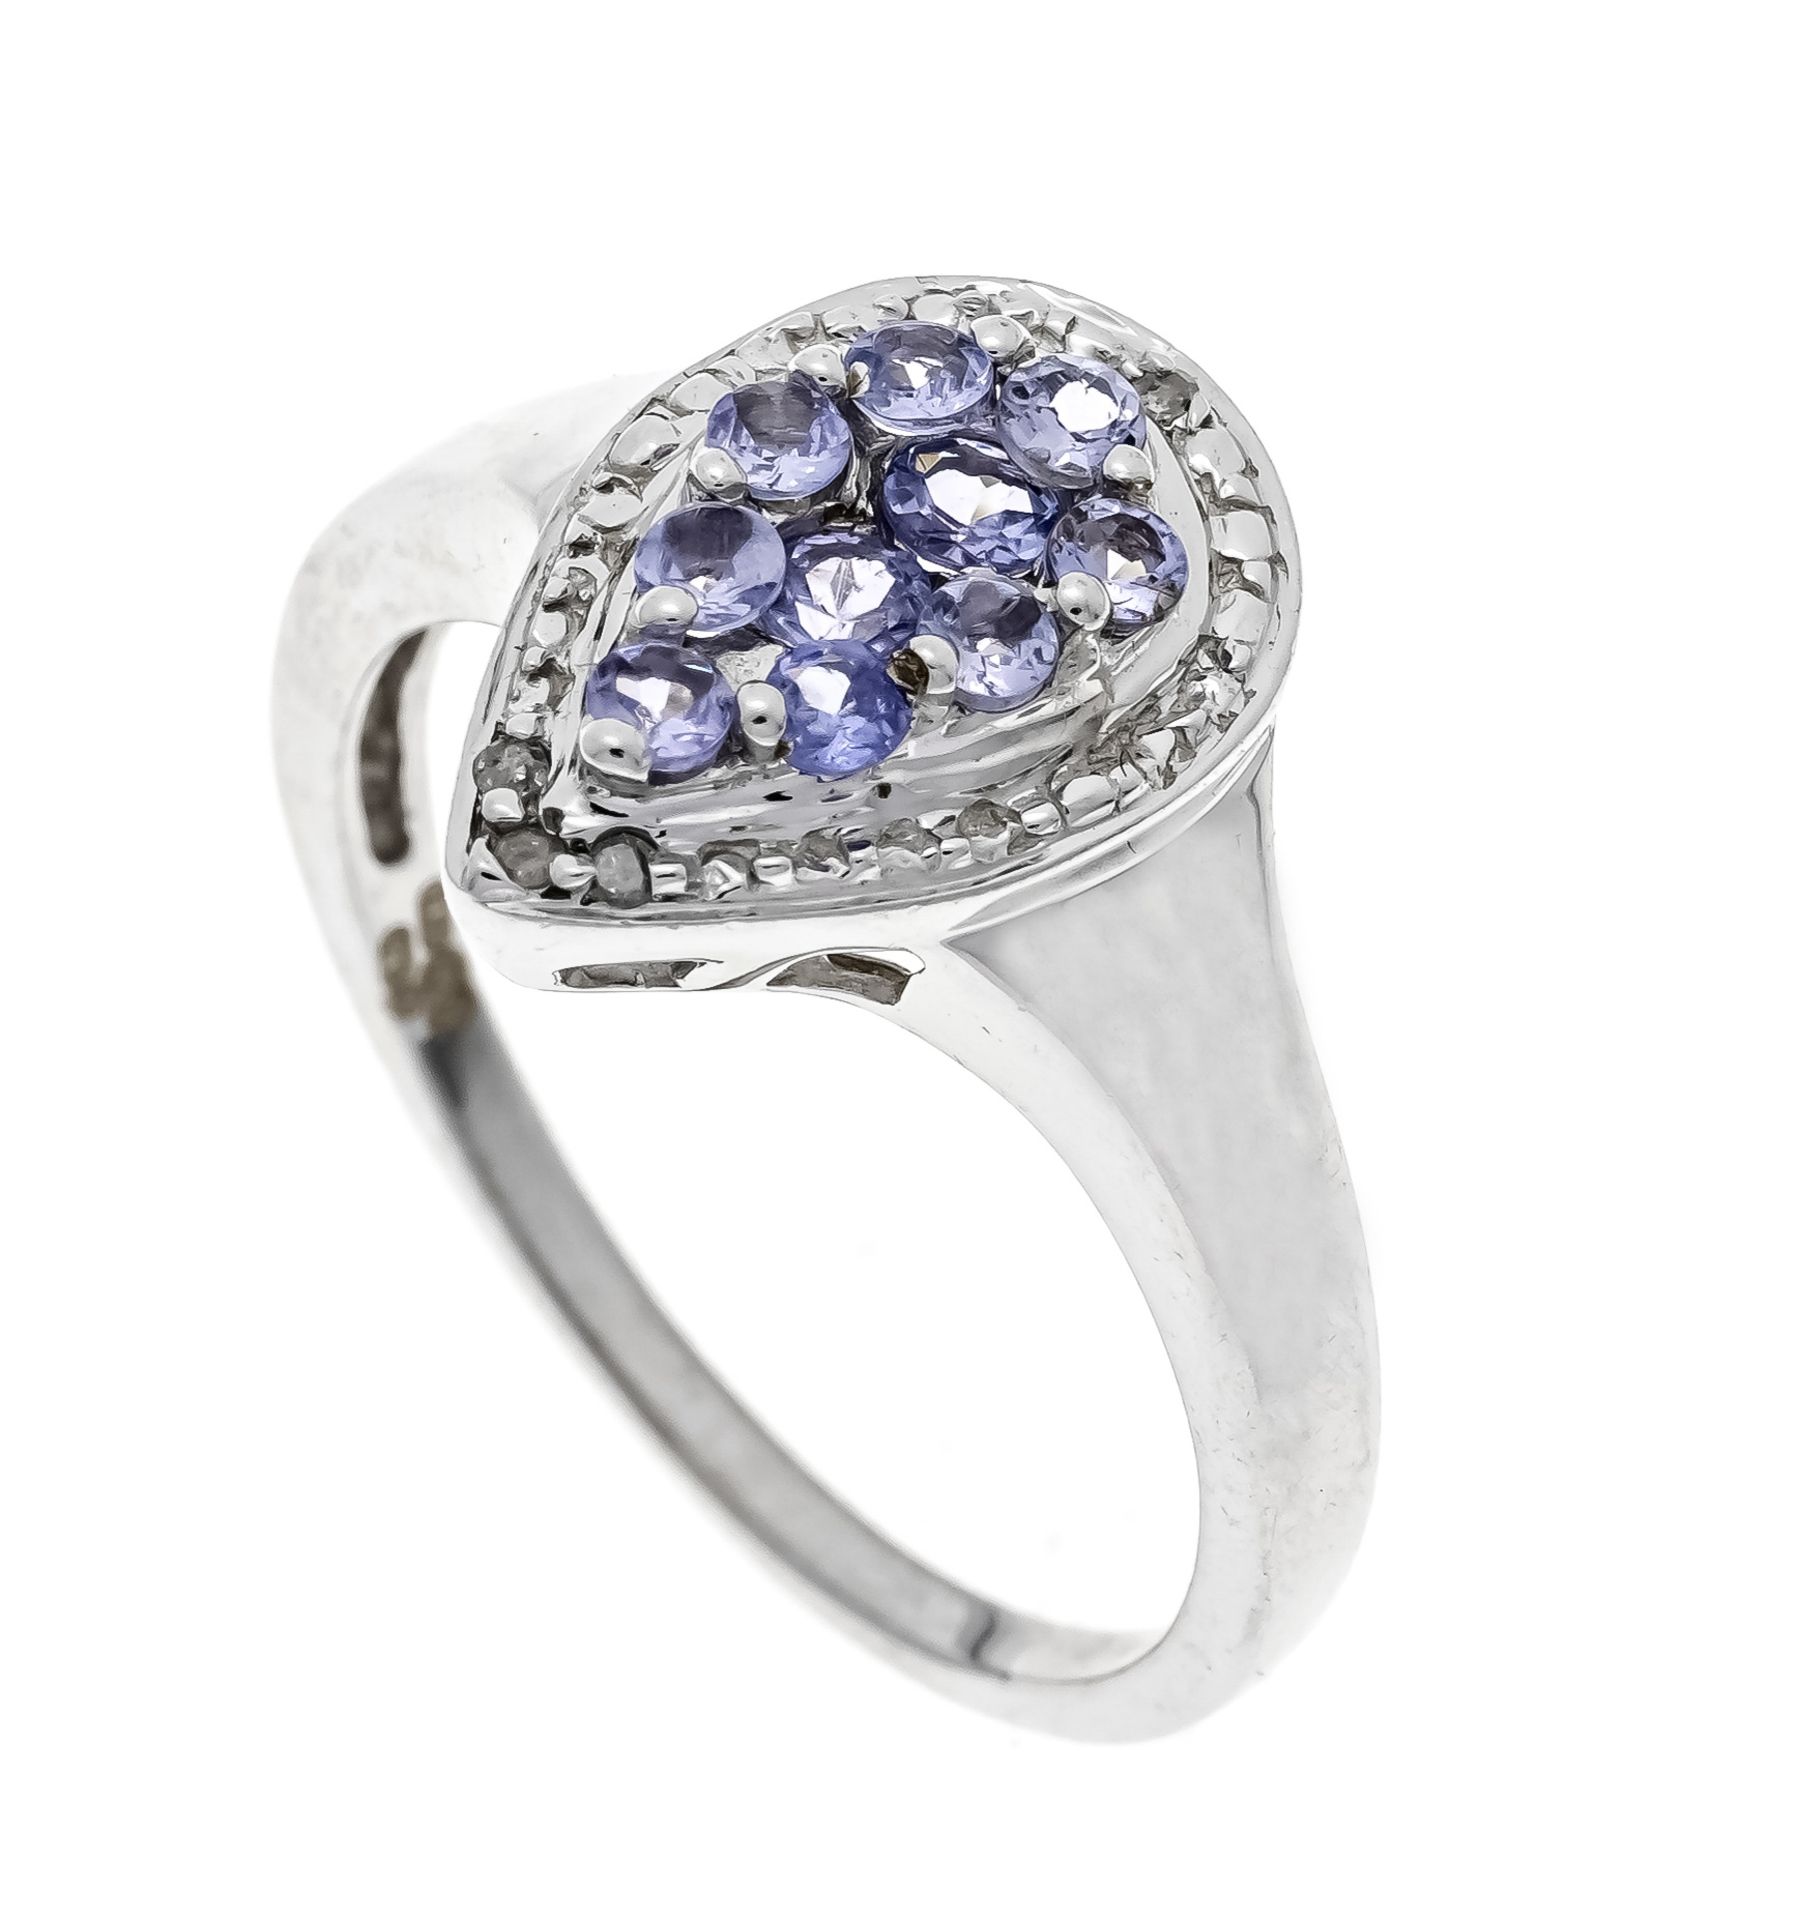 Tanzanite diamond ring WG 375/000 with 10 round faceted tanzanites, total 0.35 ct and 4 octagonal